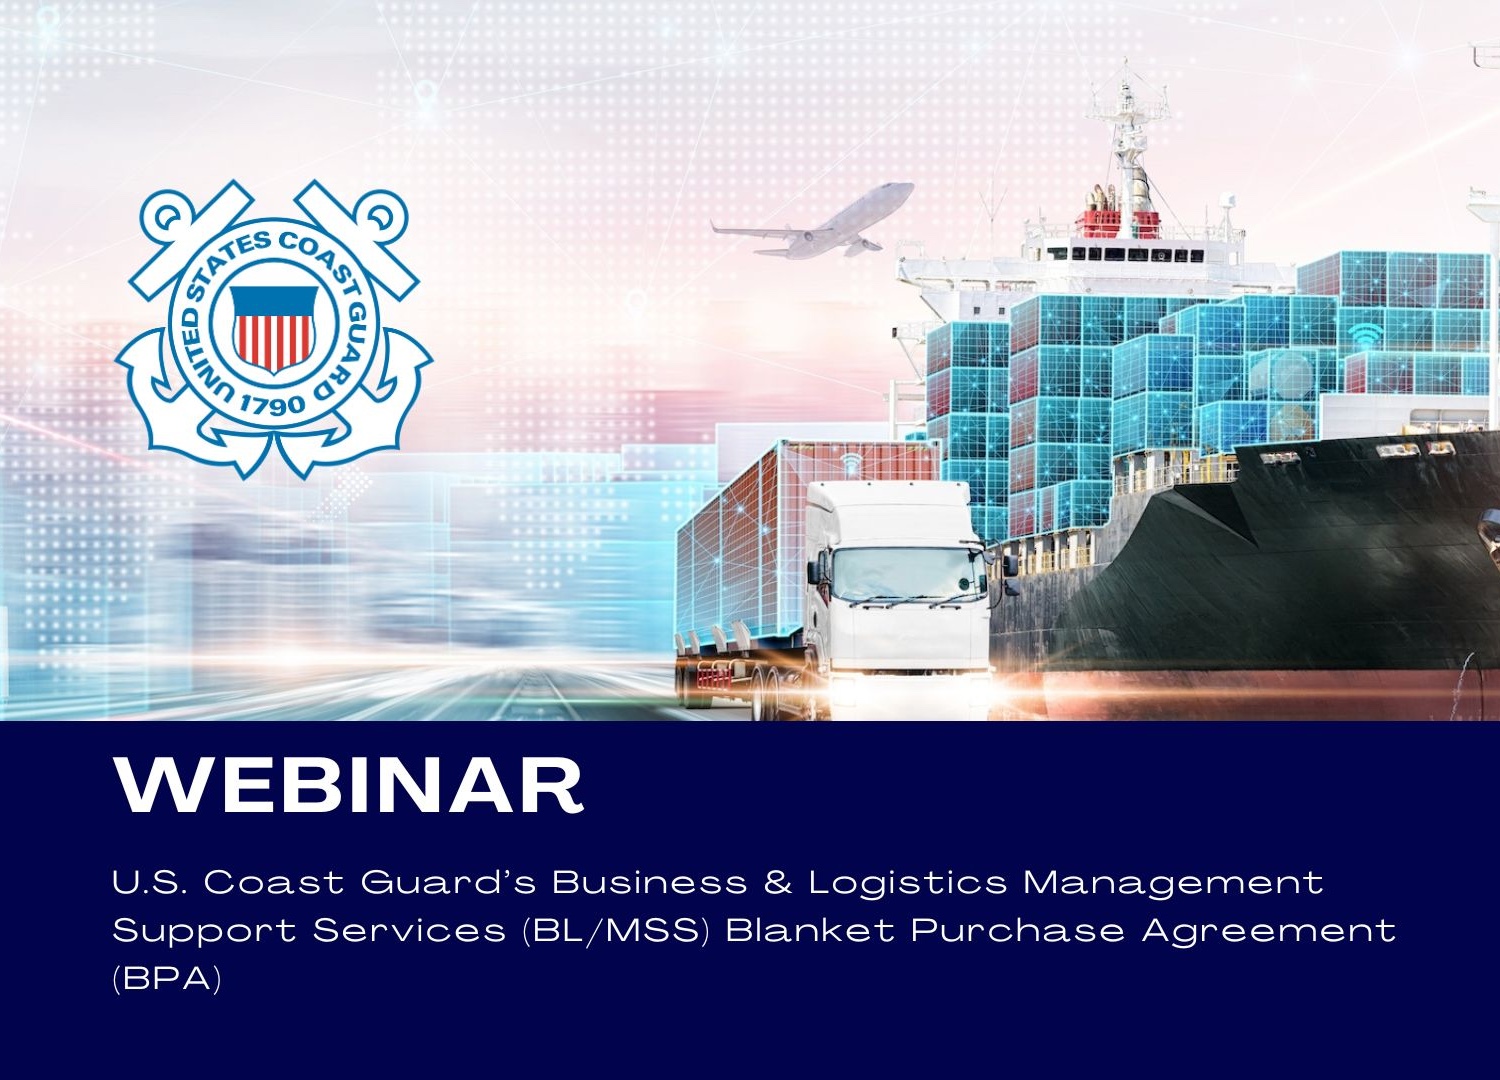 Dive into BL/MSS Contract: A Webinar on Navigating the $1.4B USCG Opportunity